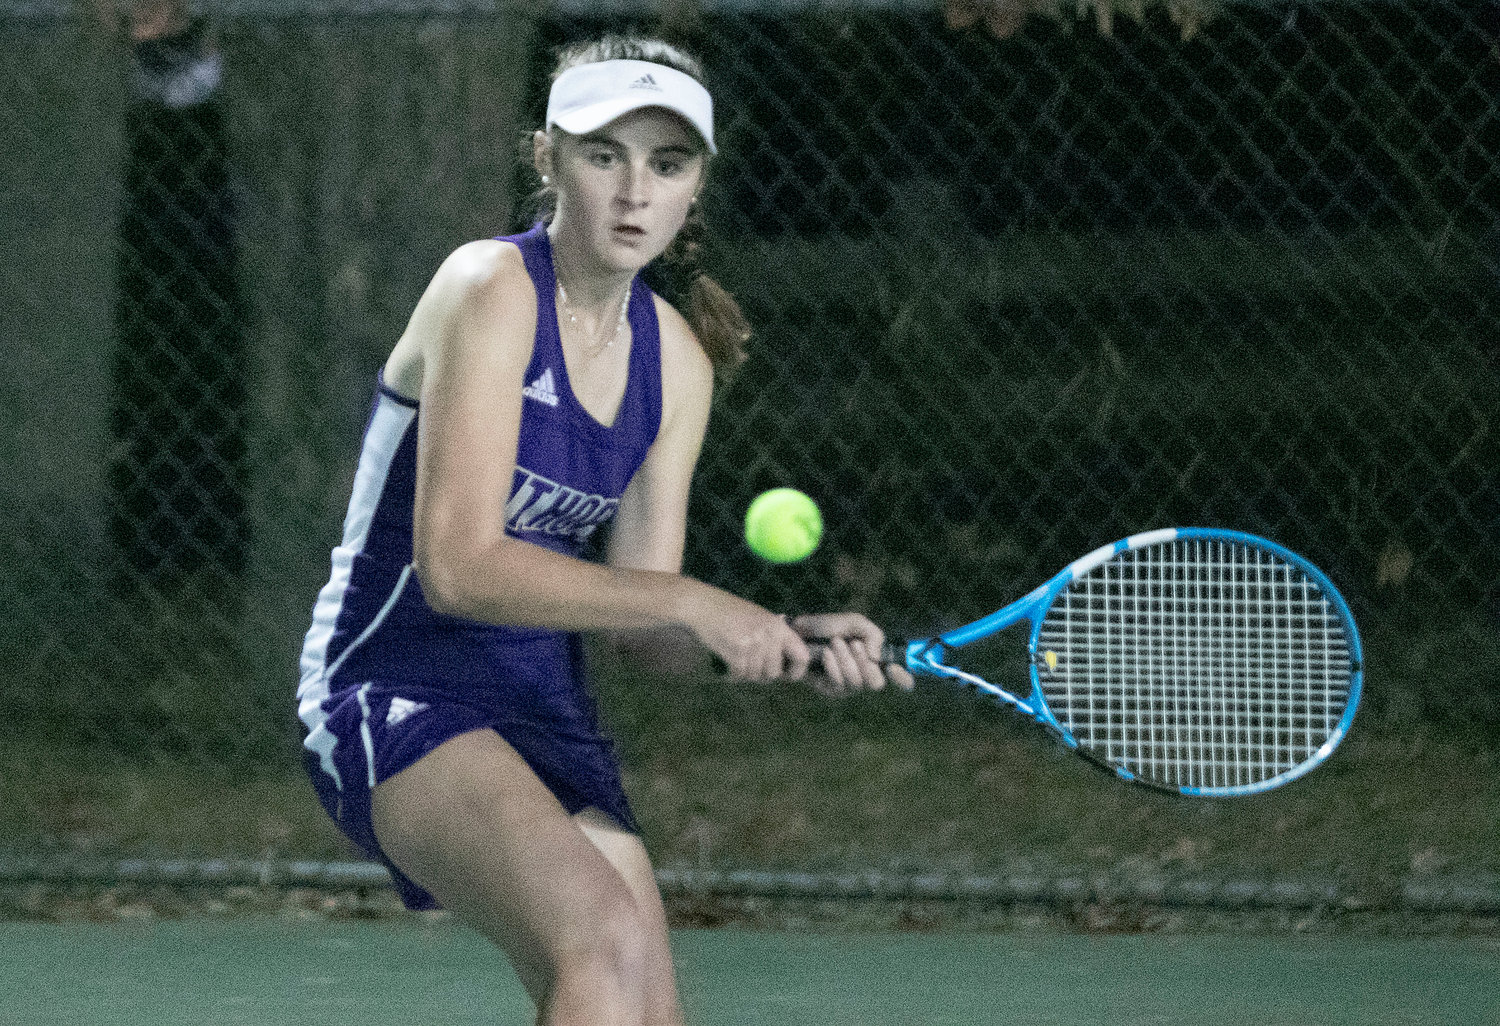 Huskies fourth singles player Ella Quesnelle, put up a tough fight, but succumbed to Prout’s Madeline Mattiucci, 6-3, 6-3.